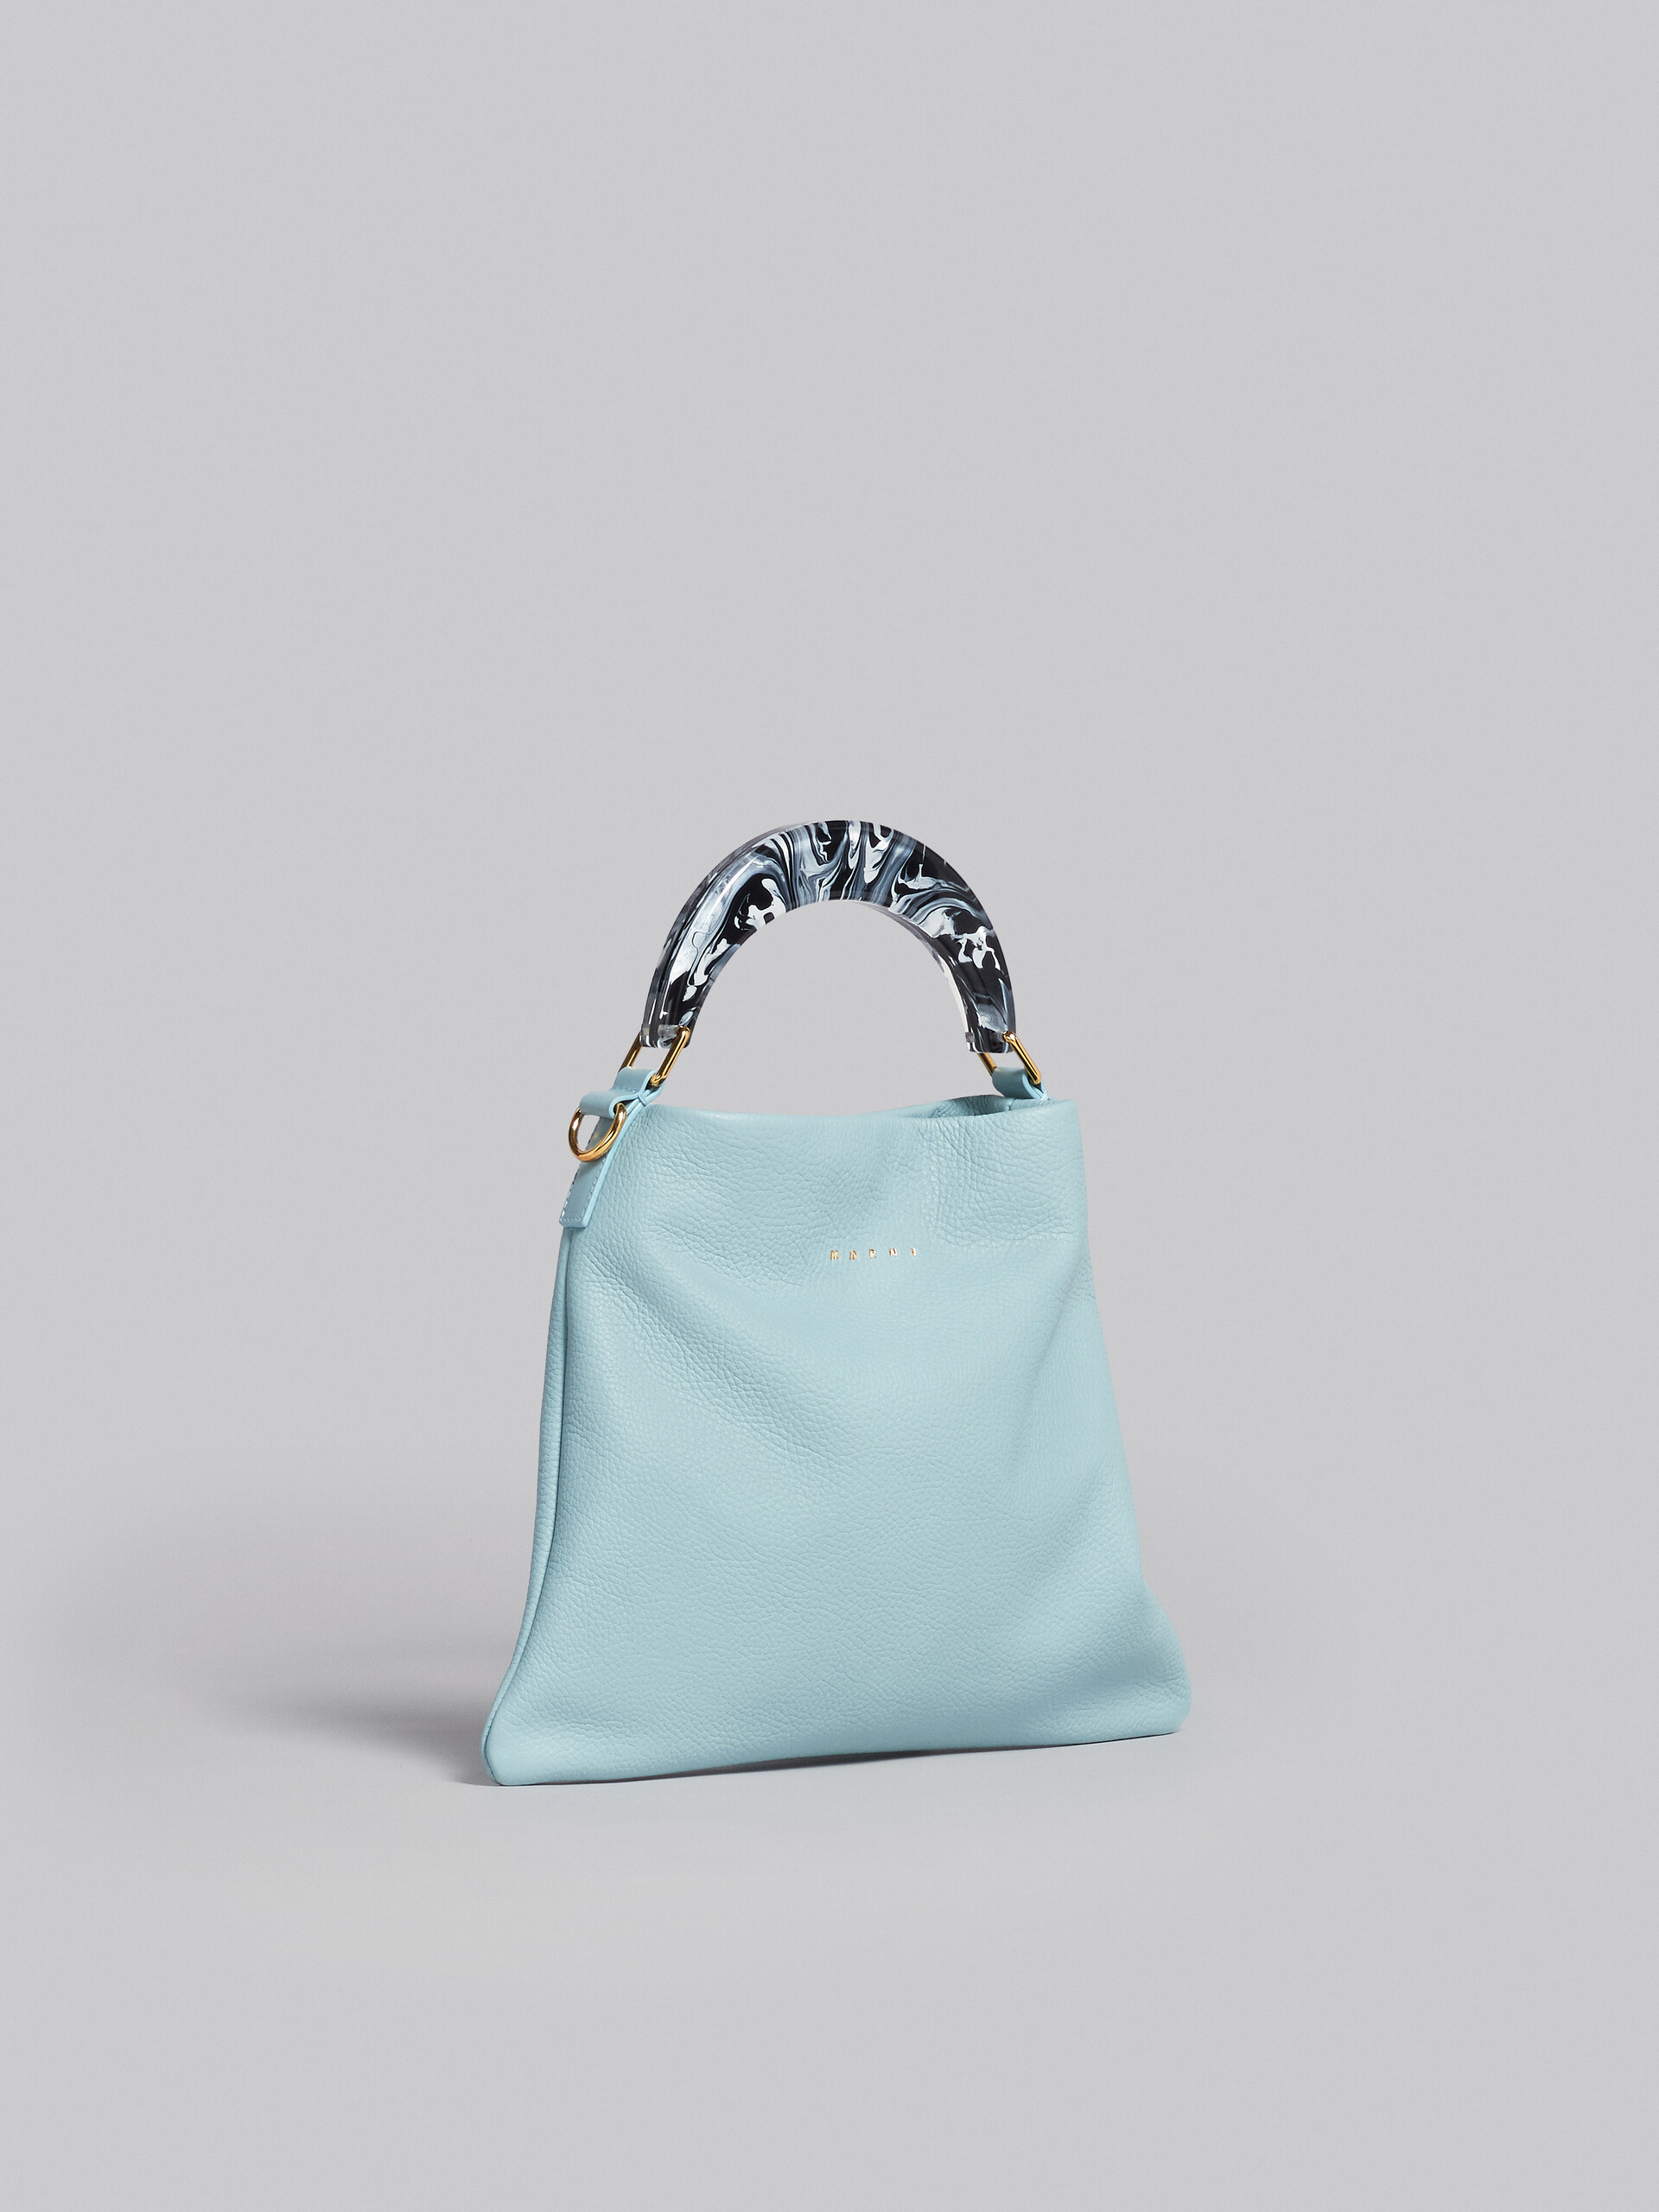 Venice Small Bag in light blue leather - Shoulder Bags - Image 6